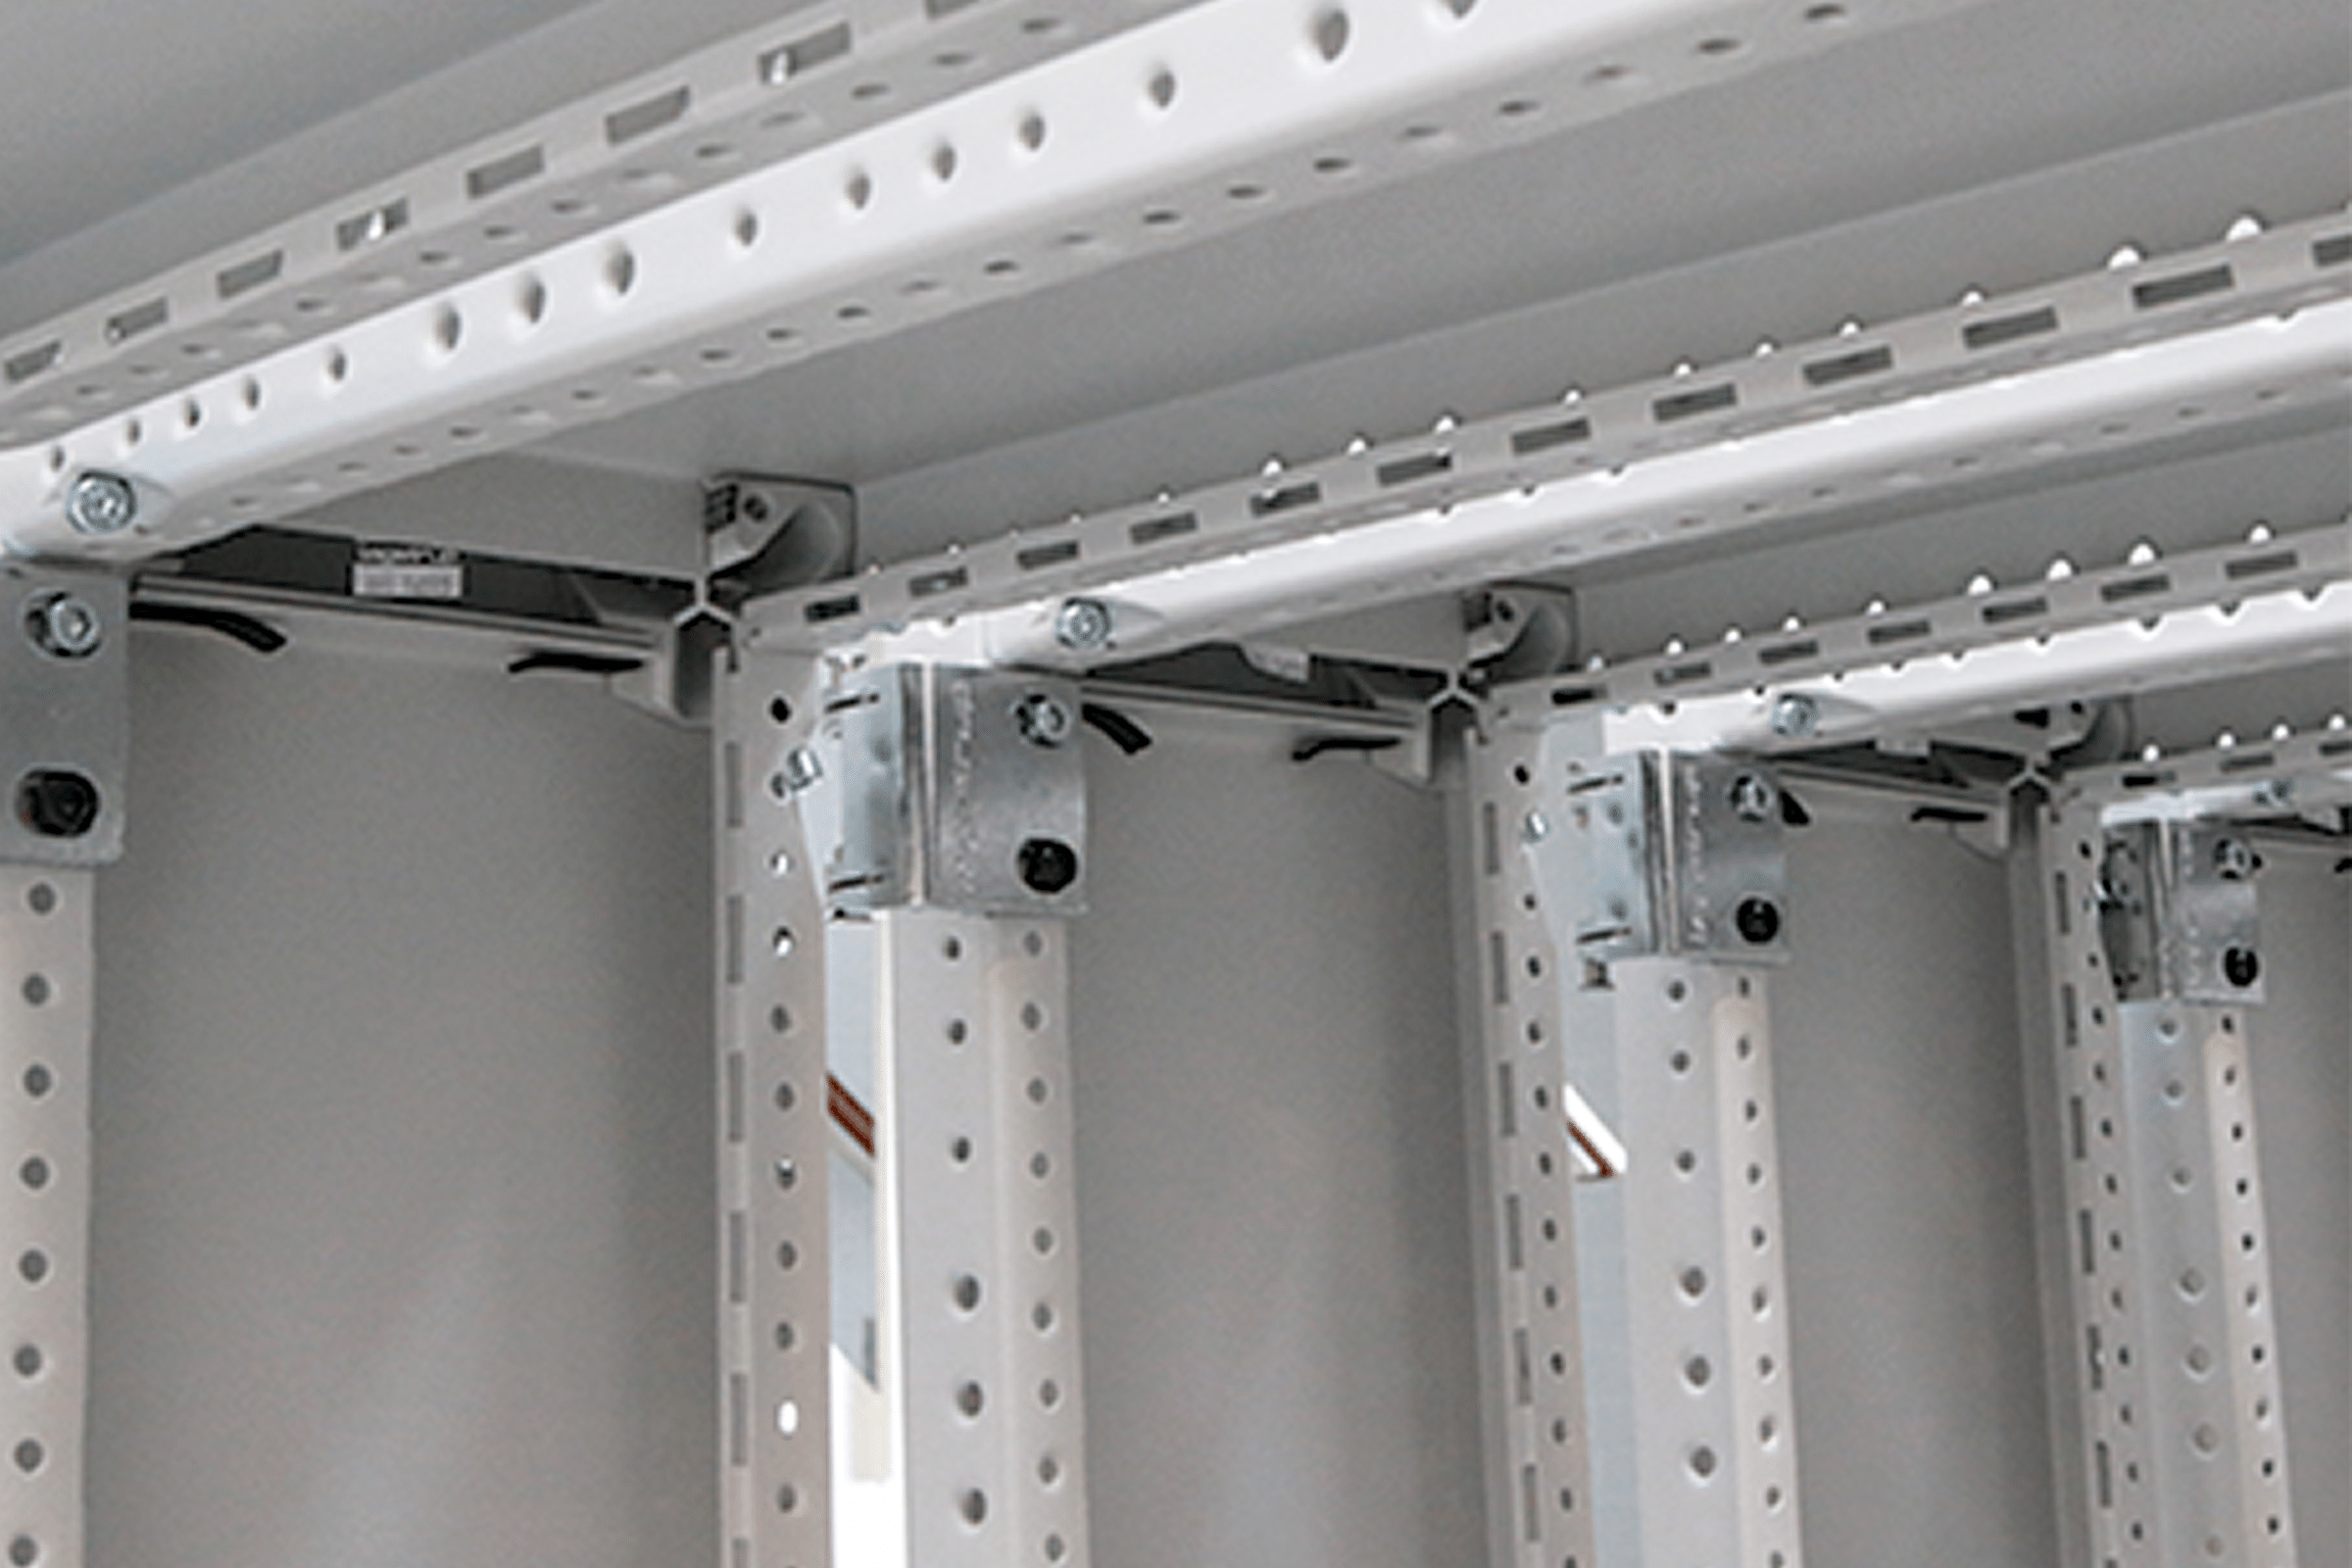 Logstrup Steel's low voltage high quality electrical switchgear include Cabinet structures which is shown on the picture